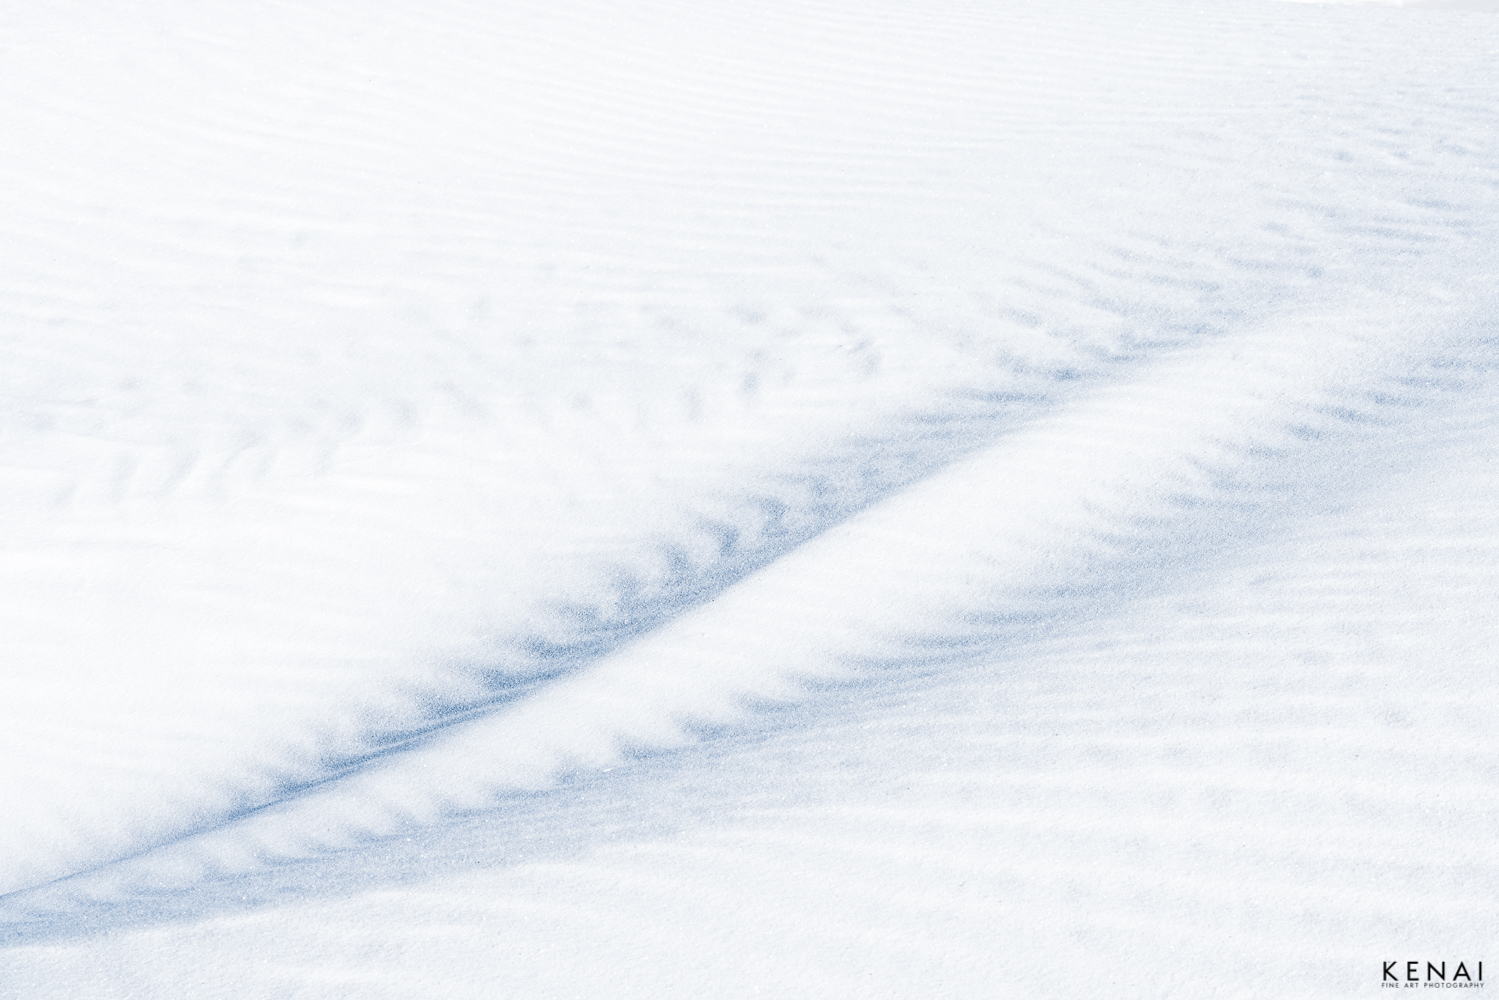 A simple abstract shape in the dunes of White Sands National Park, New Mexico.